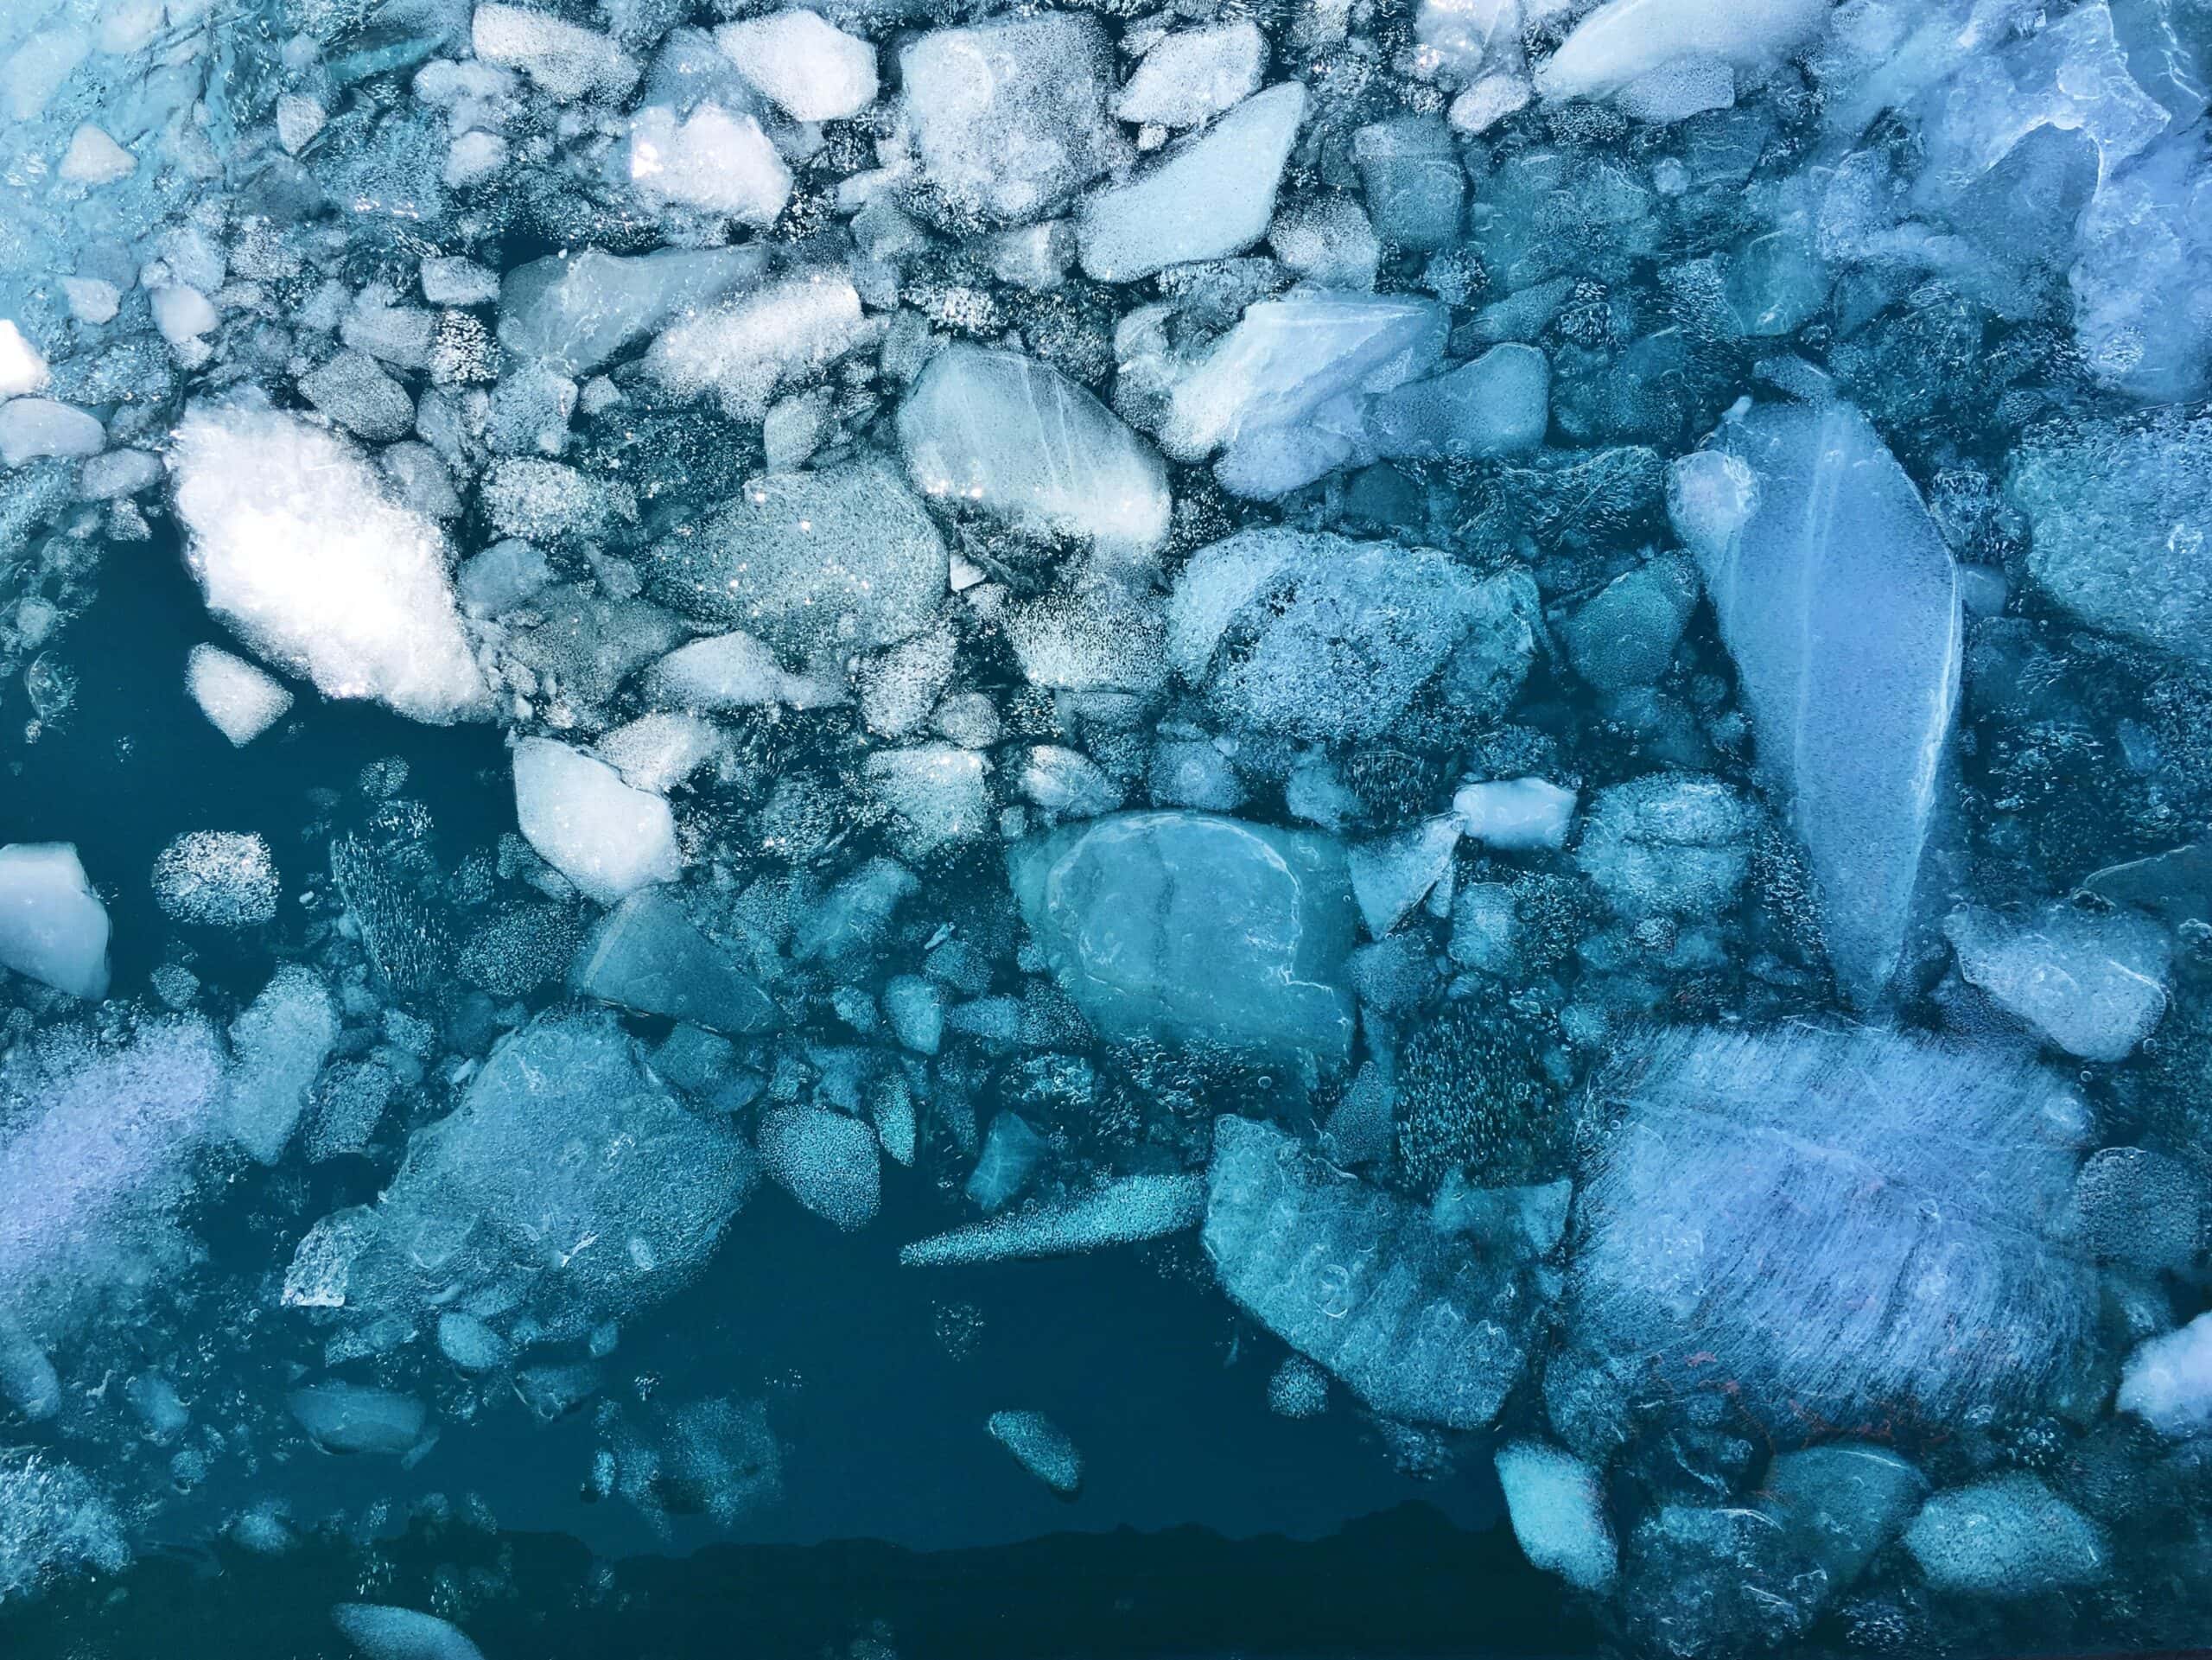 Large ice chunks float on top of the water - aerial view